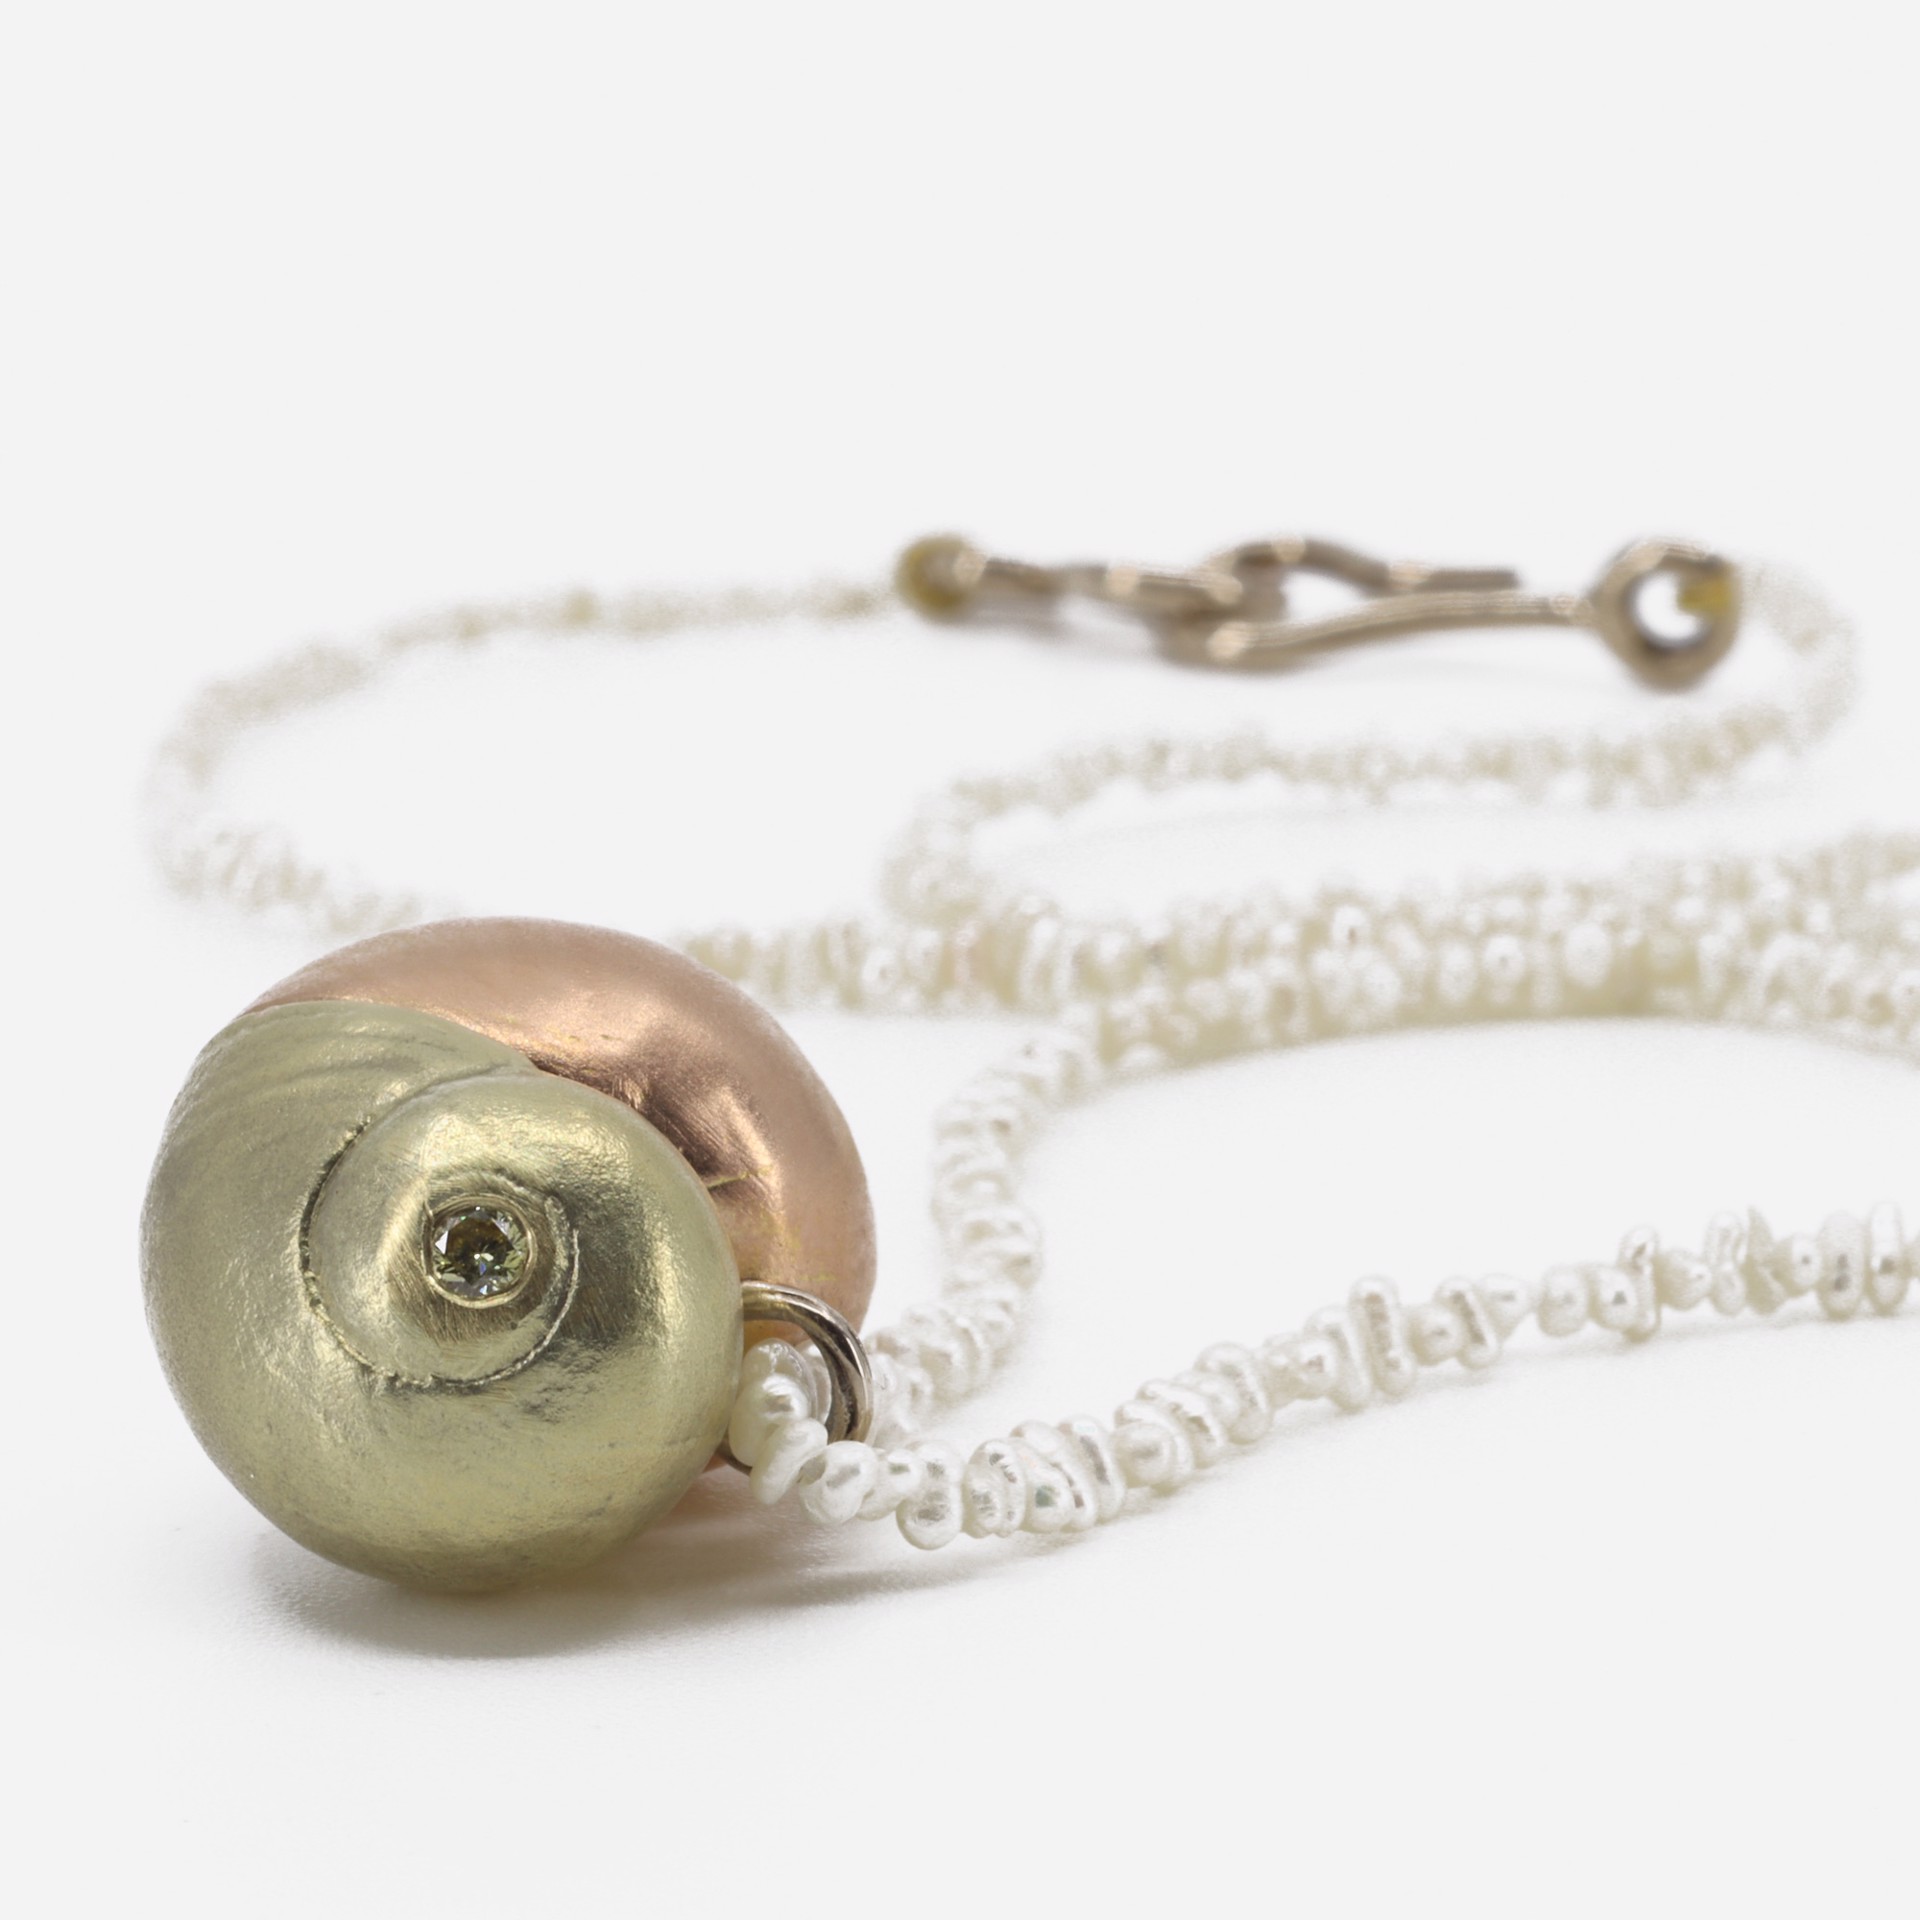 He Sells Seashell: Large Shell Heart Necklace by Christopher Thompson Royds